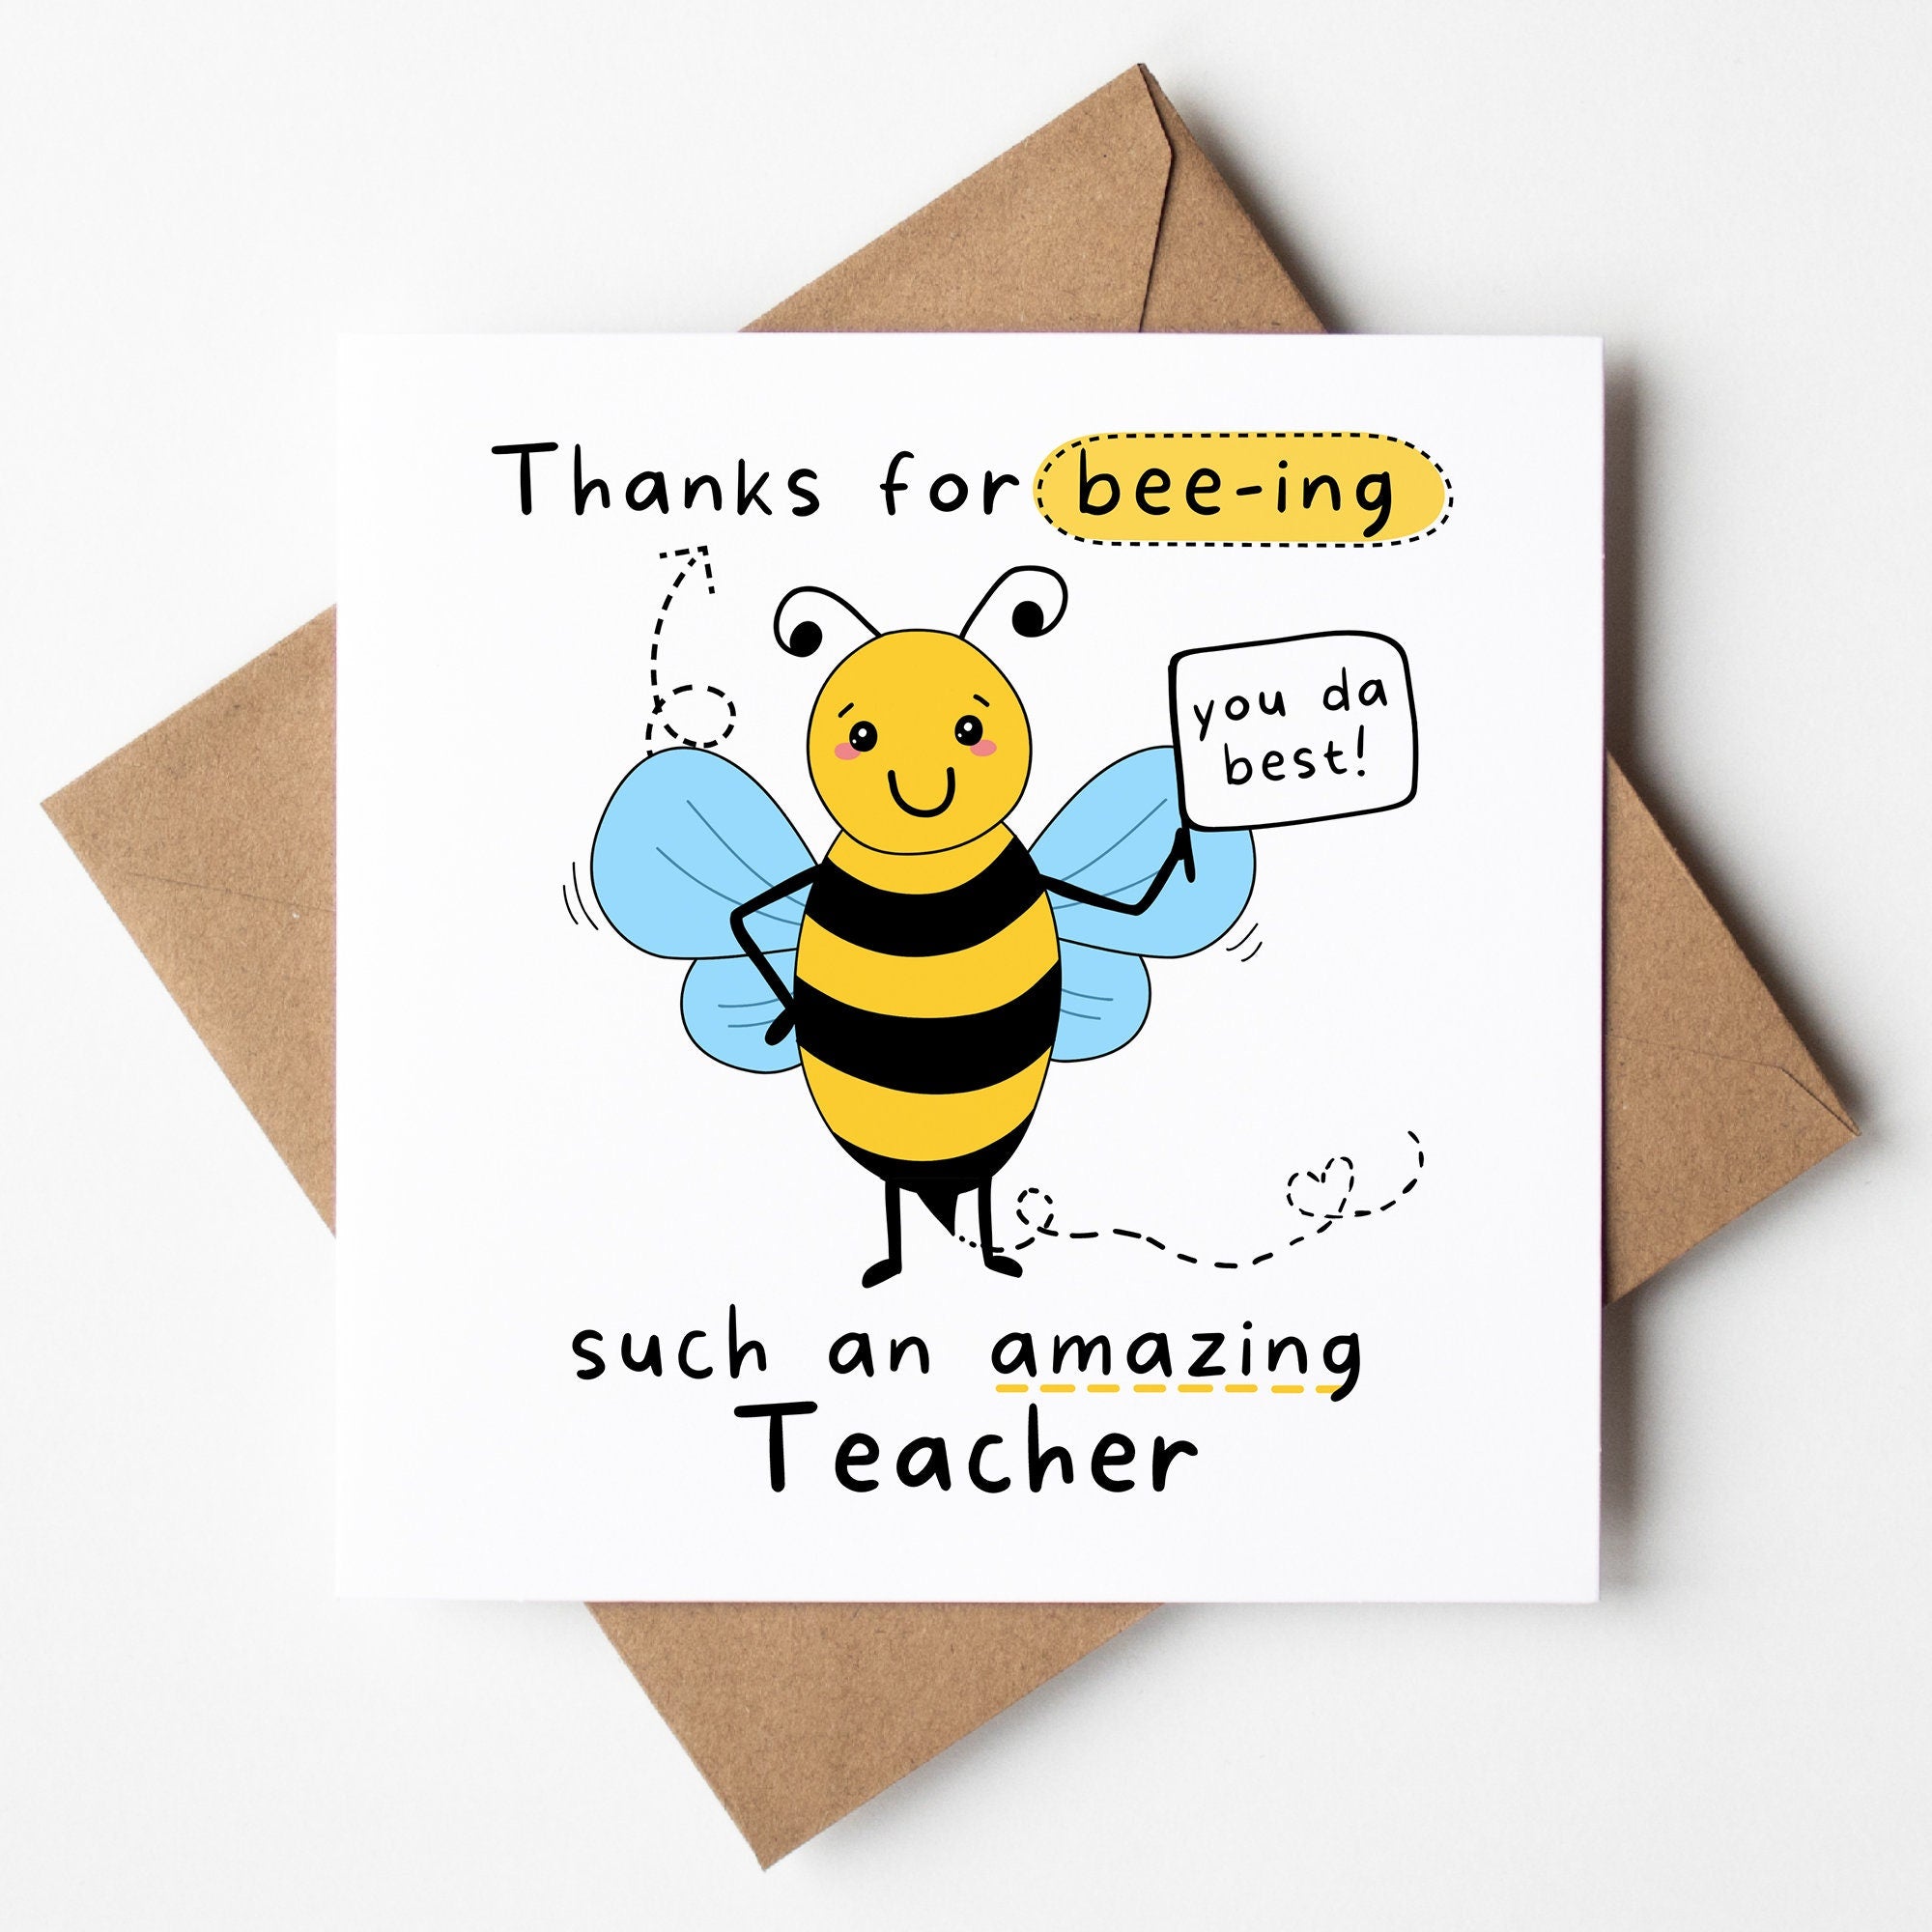 Thanks For Beeing Such An Amazing Teacher, Cute Card, Bee Pun, Teacher Thank You Card, Card For Teacher, Teaching Assistant